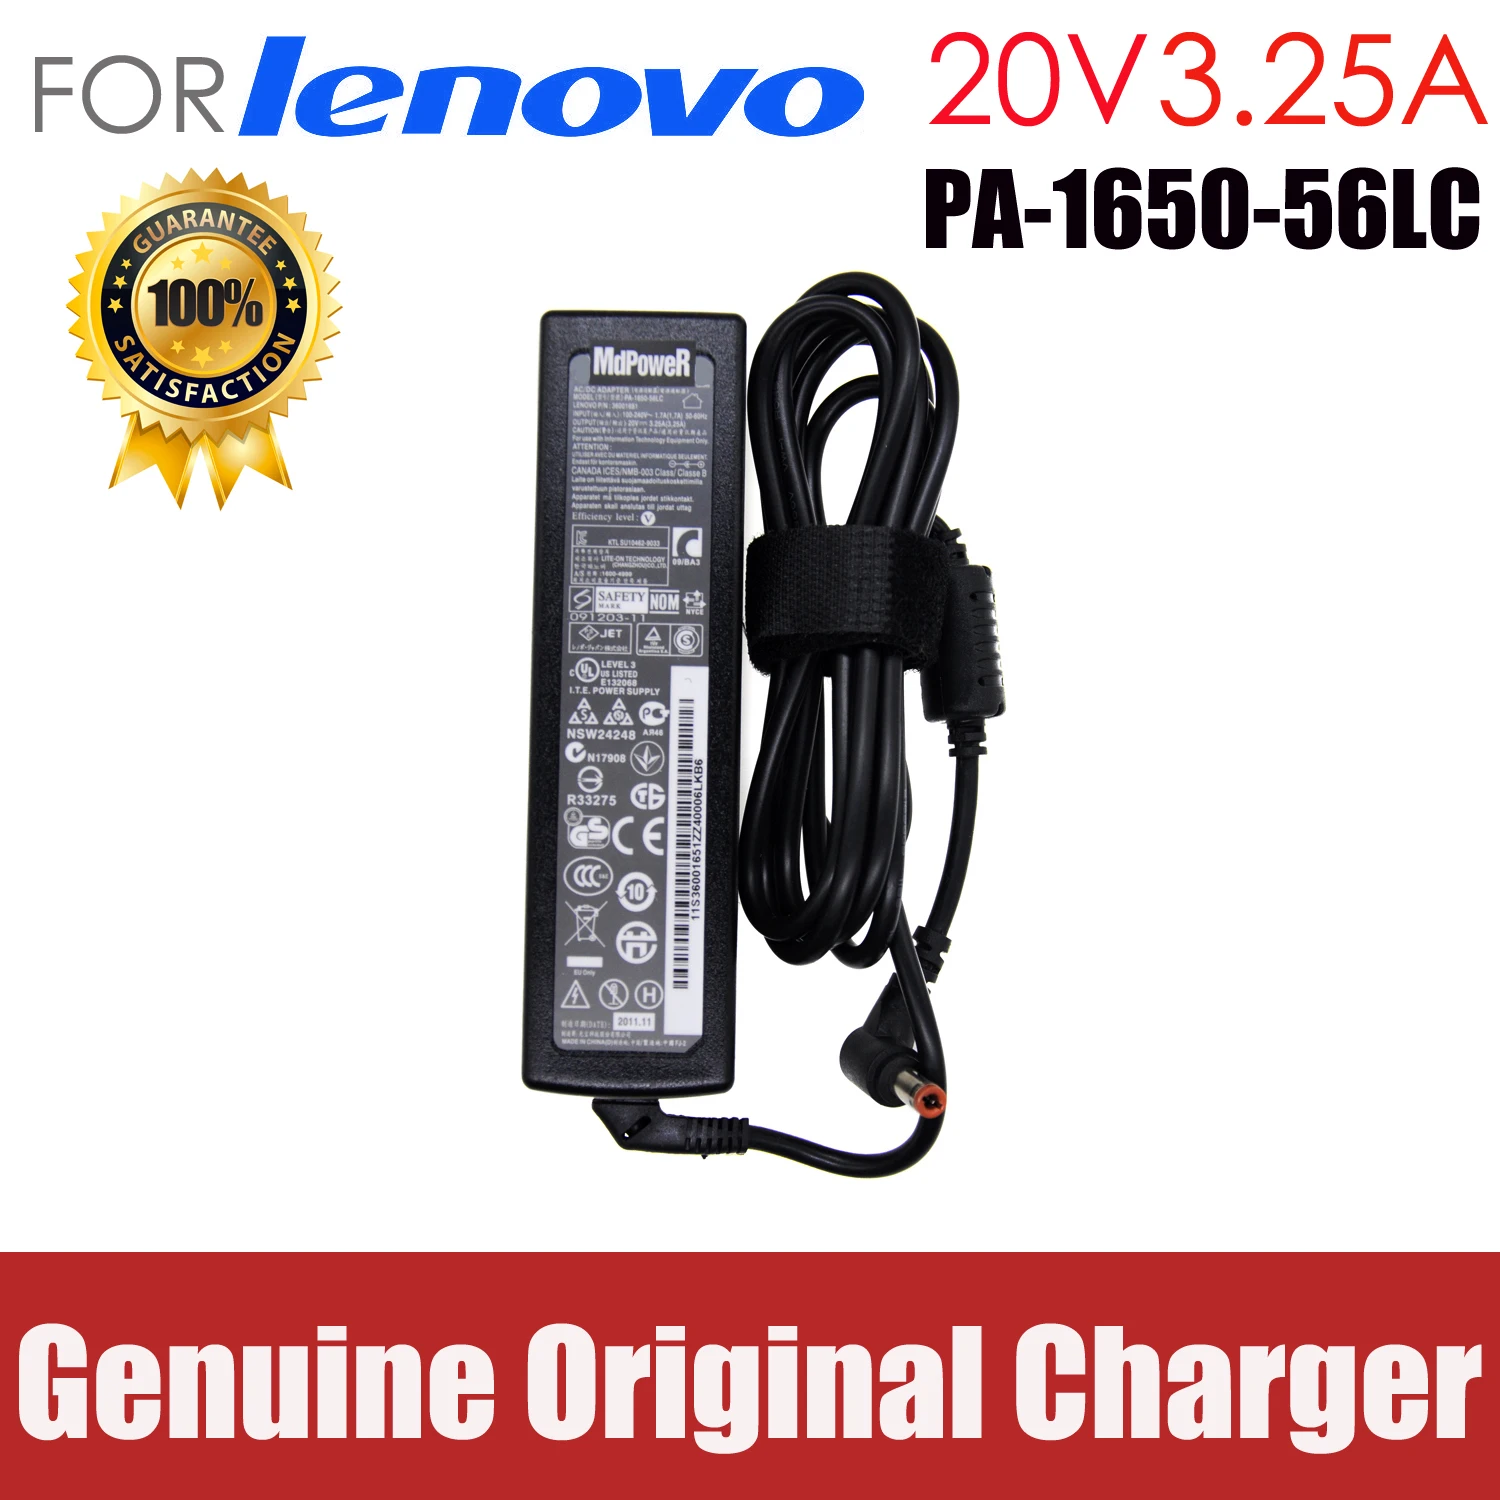 

Original 20V 3.25A 65W For LENOVO S405 S405 S410 S415 S435 S436 U310 U410 U460 U510 Z475 Z485 power laptop AC adapter charger